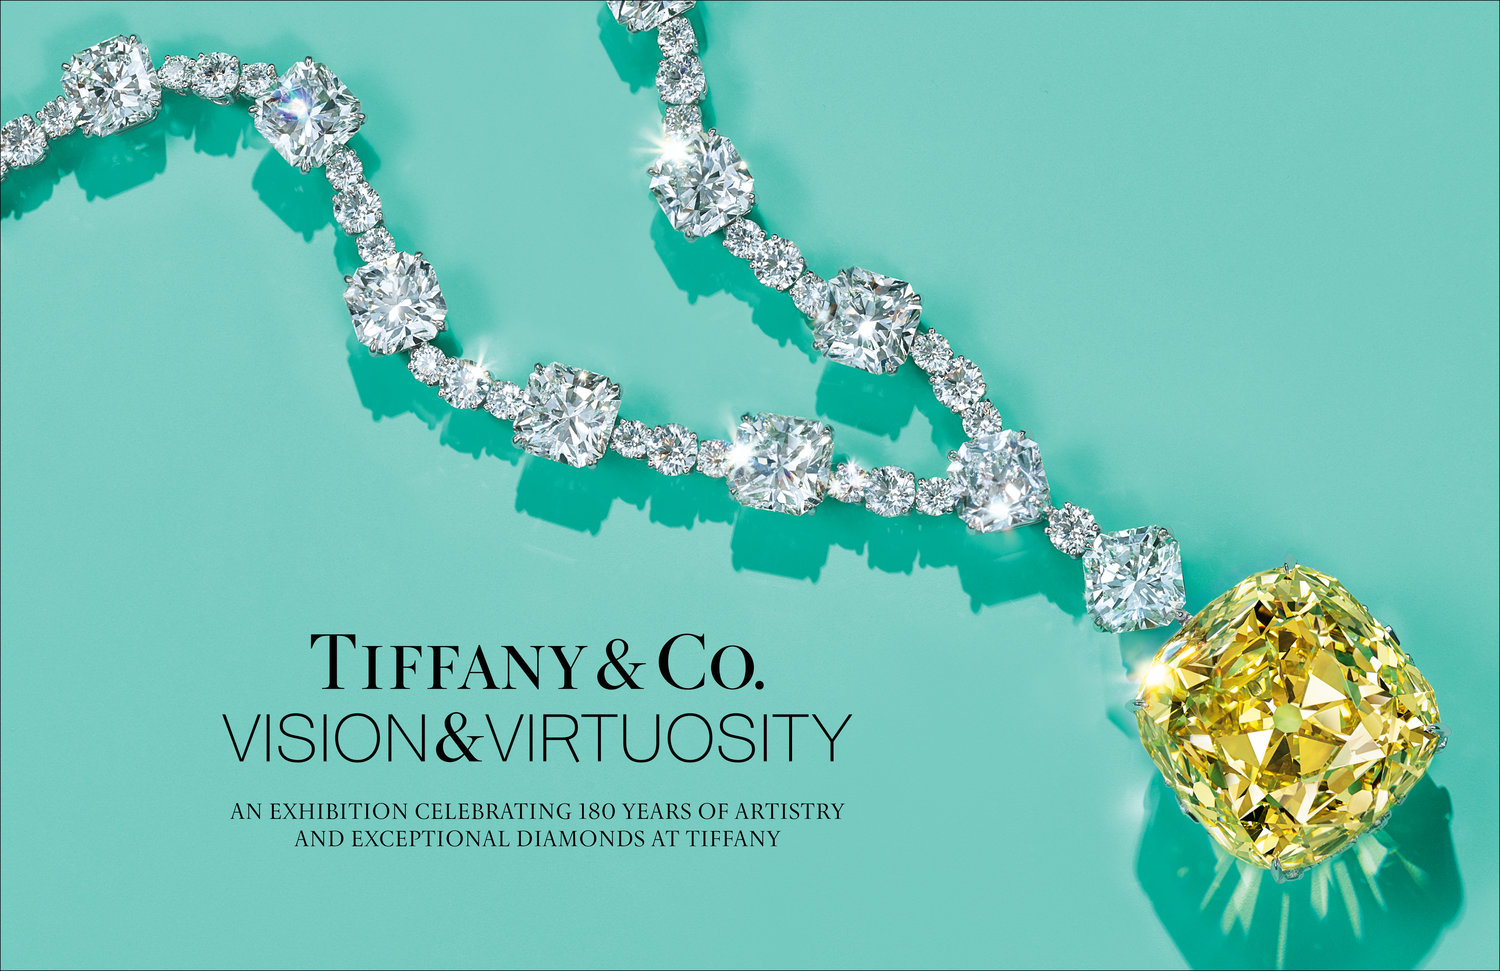 tiffany and co vision and virtuosity exhibition